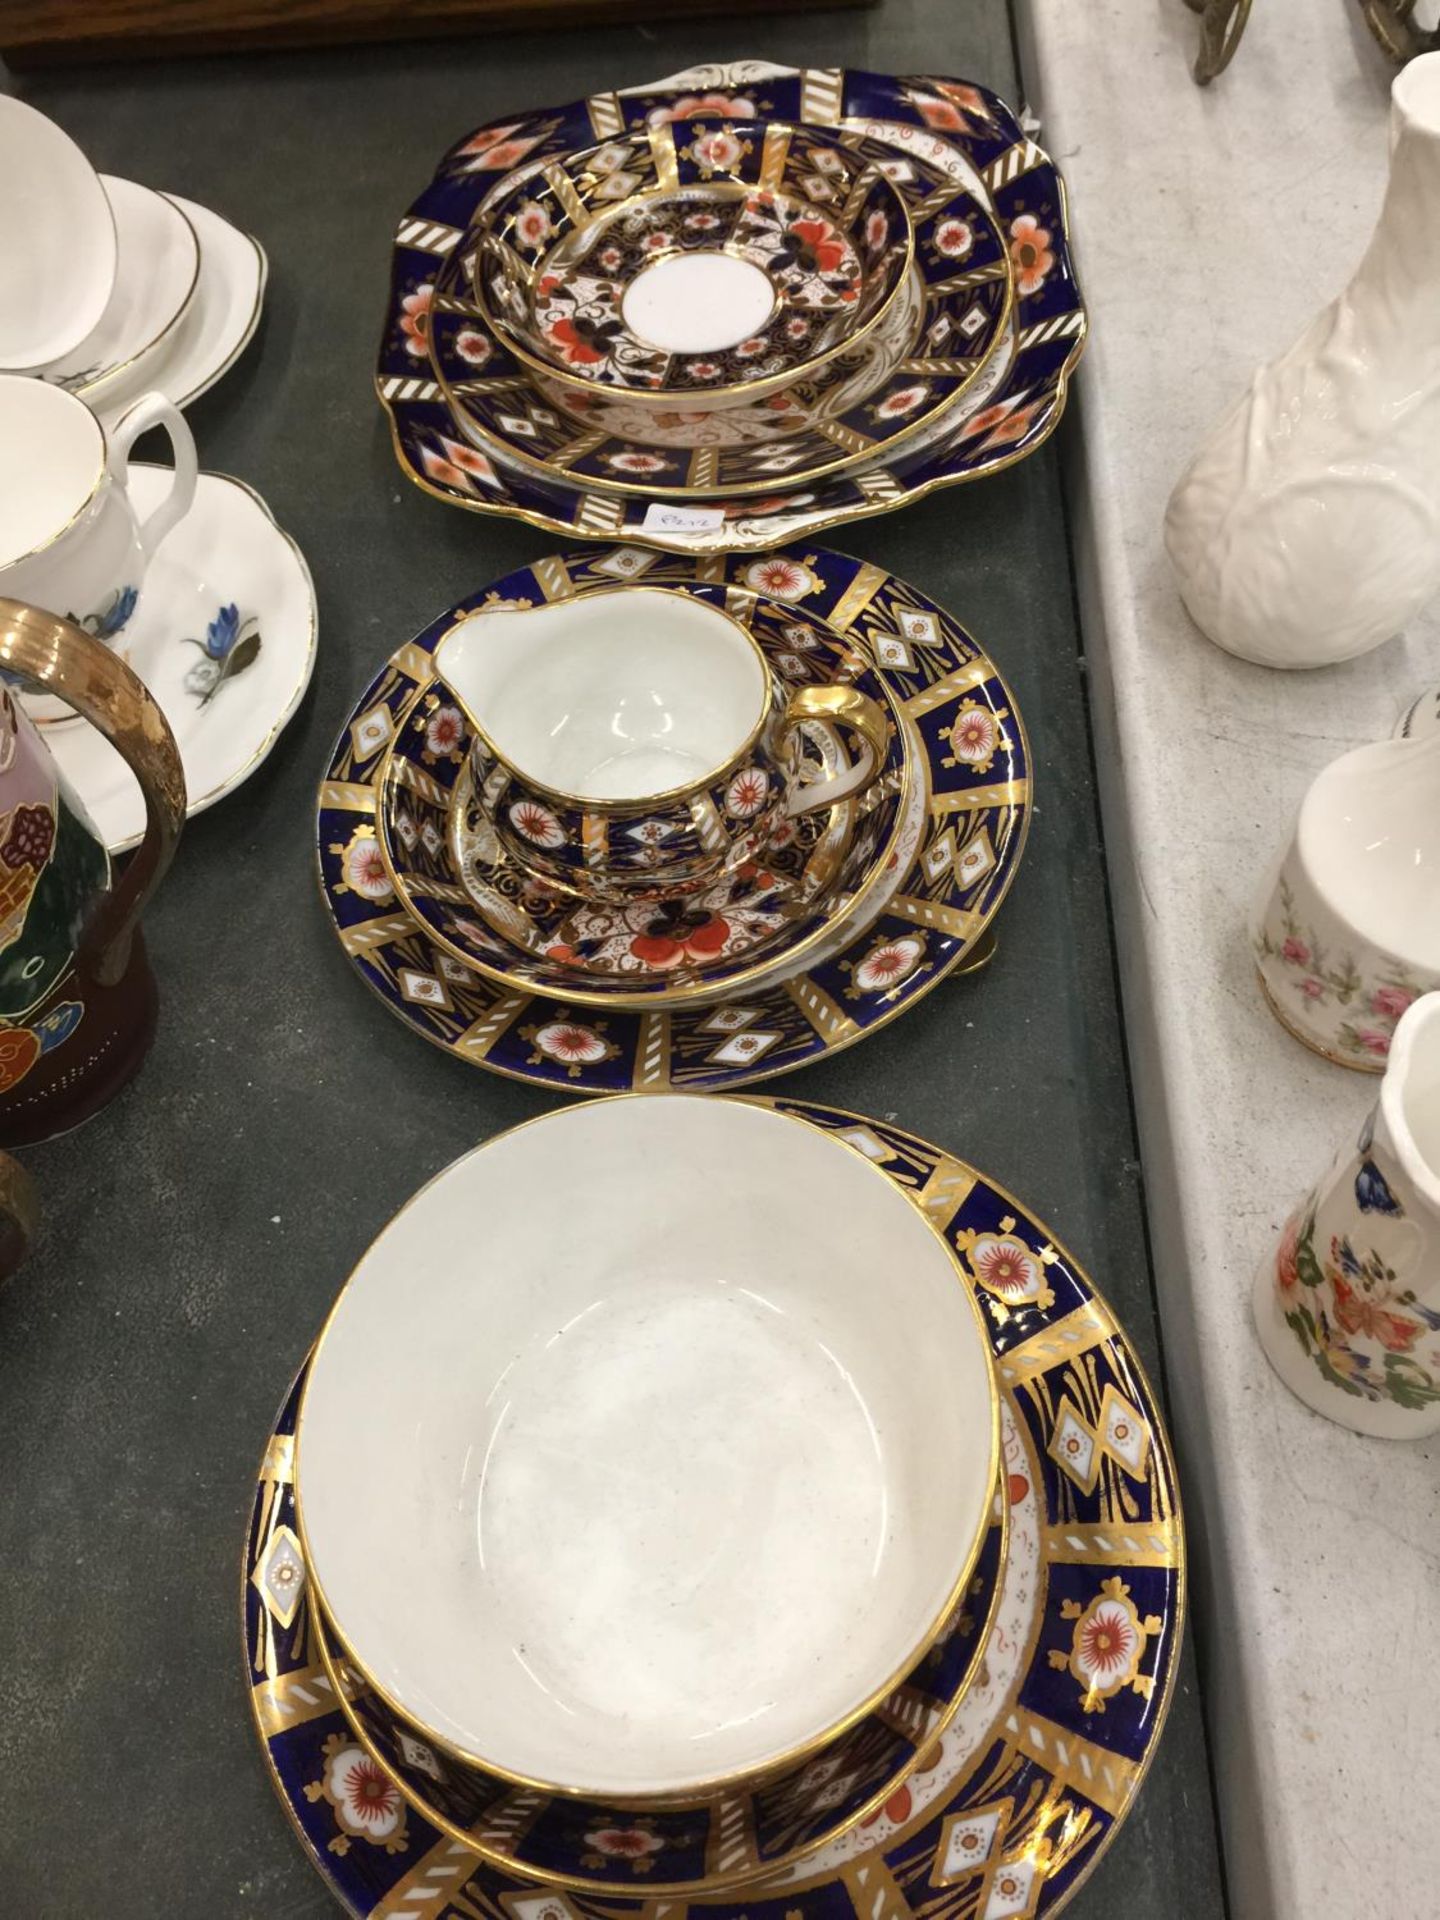 A QUANTITY OF VINTAGE POINTONS CHINA TO INCLUDE A CAKE PLATE, PLATES, SAUCERS, A CREAM JUG AND SUGAR - Image 6 of 8